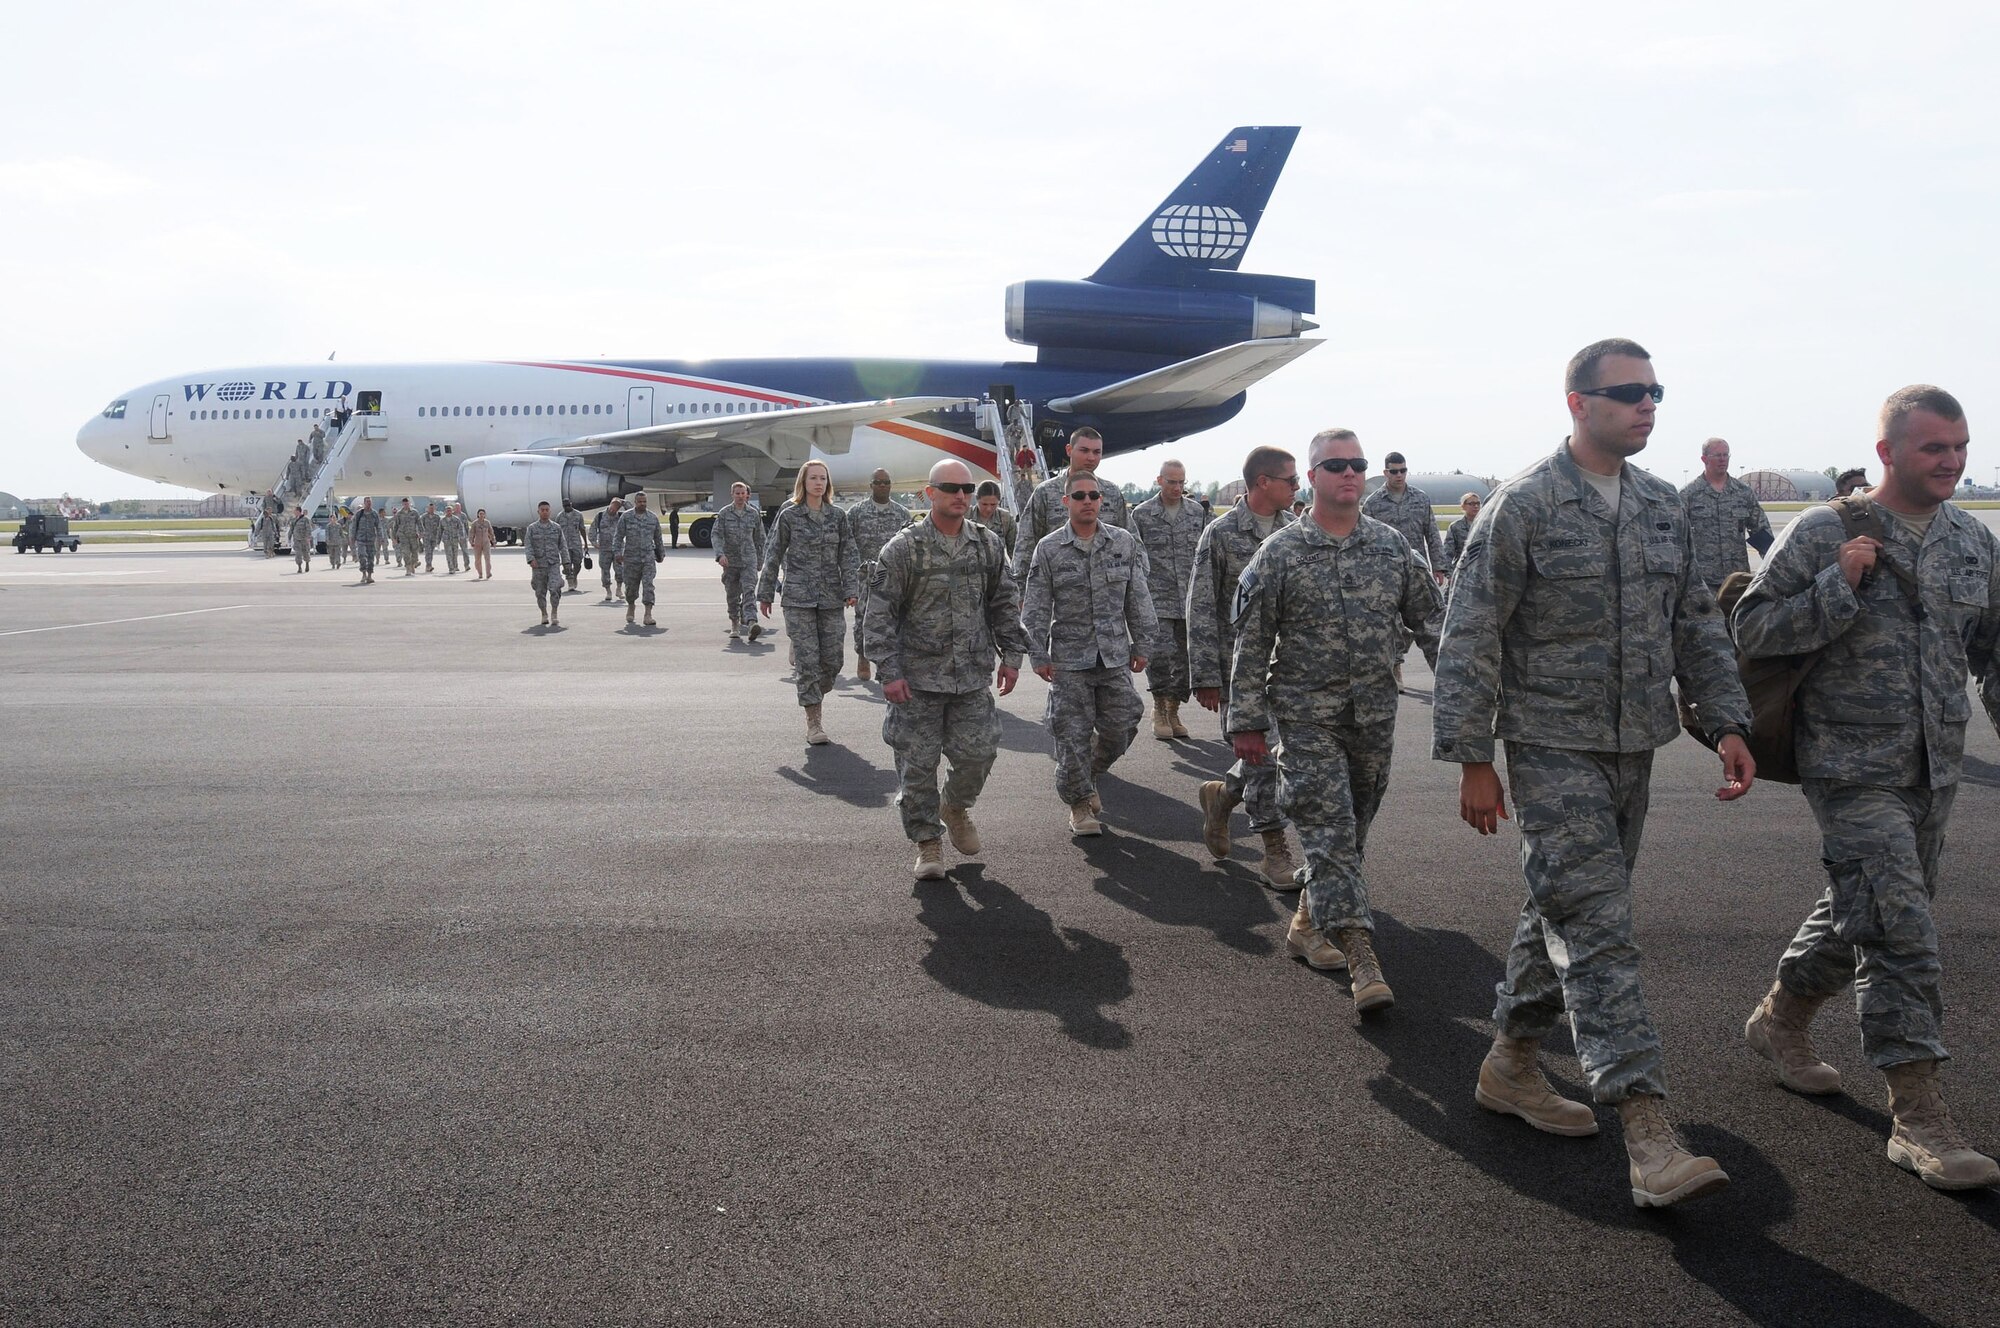 Military servicemembers returning from deployment disembark a government chartered aircraft arriving from an air base in Southwest Asia Sept. 11, 2009, at Aviano Air Base, Italy. The servicemembers were amongst the first to use the new passenger and air freight terminal at Aviano AB since it opened for passenger processing Sept. 10. (U.S. Air Force photo/Airman 1st Class Ashley Wood) 
